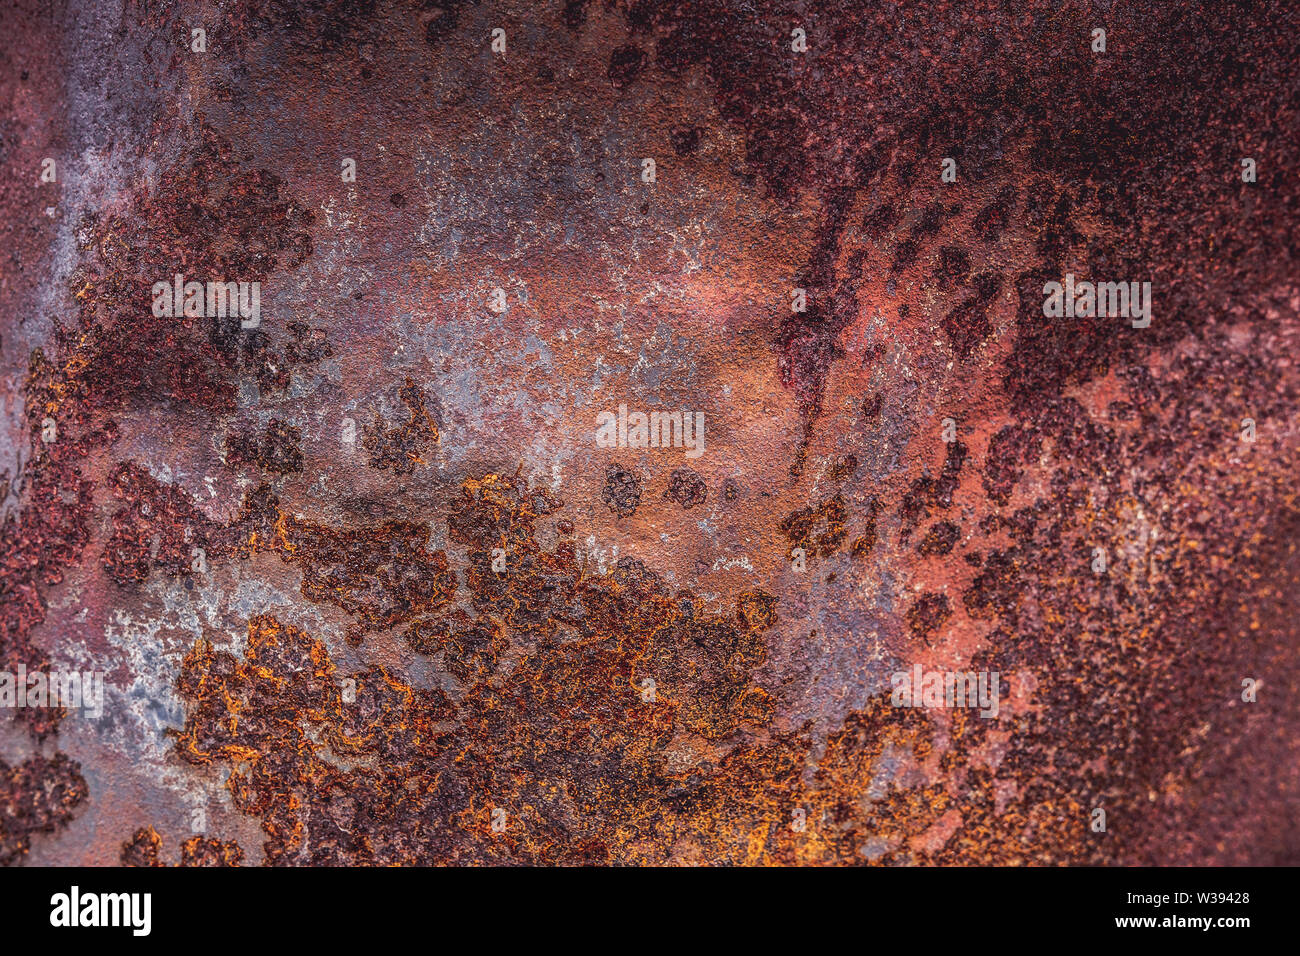 Old Rusty Red Metal Corrosion Oxidized Texture Surface. Rusted Iron Grunge Abstract Background. Stock Photo